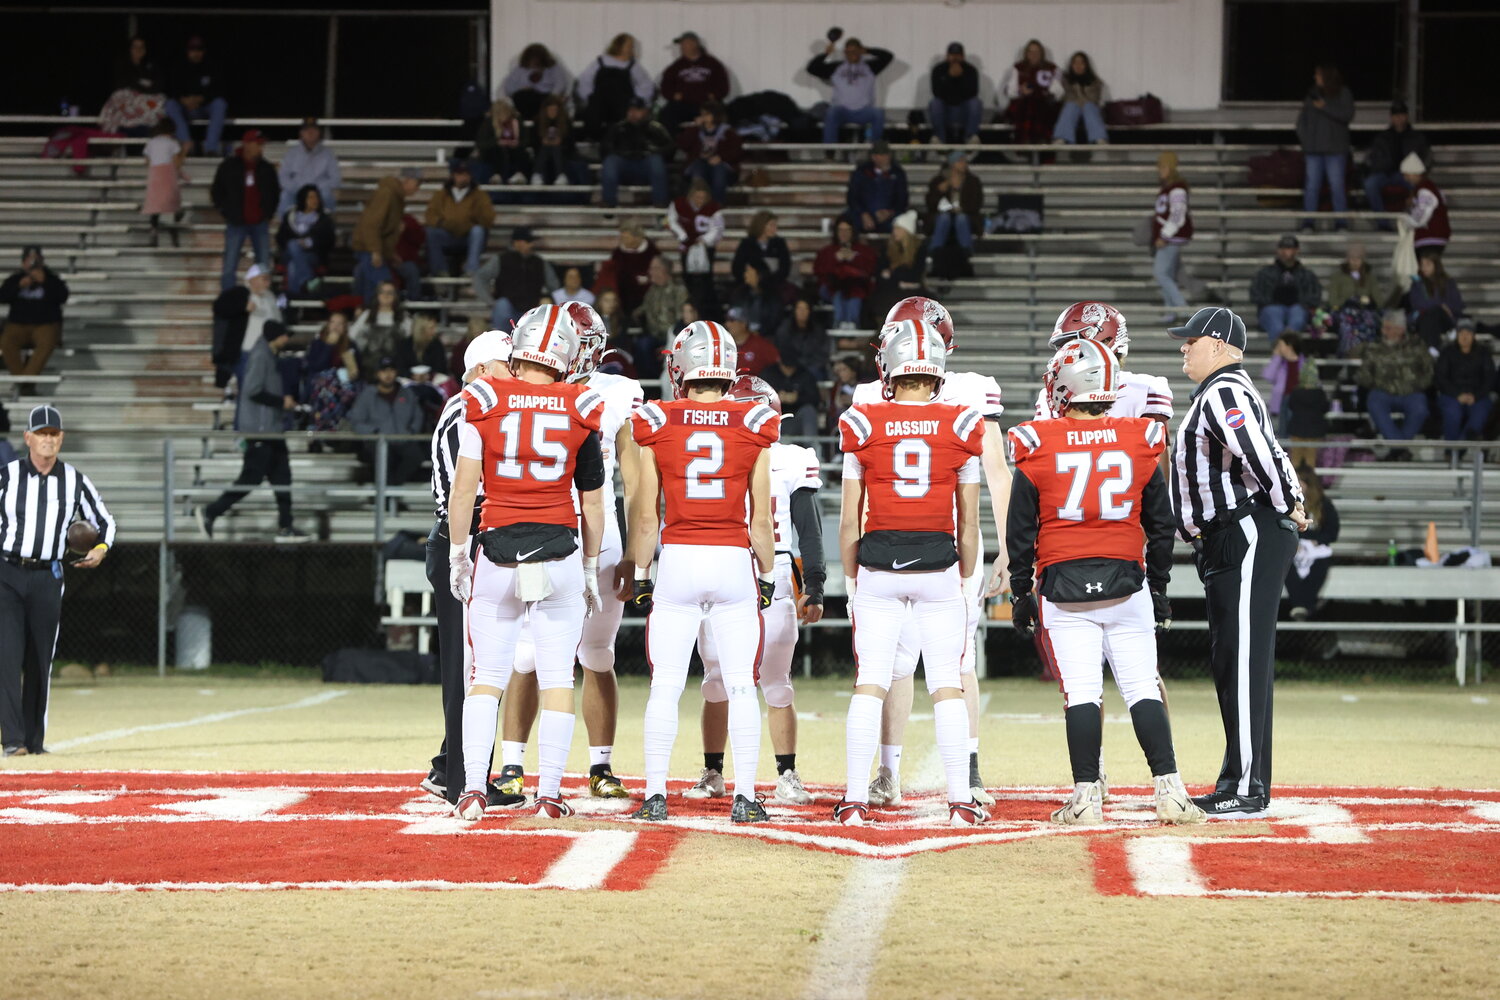 Team captains for the Rebels at the coin toss.